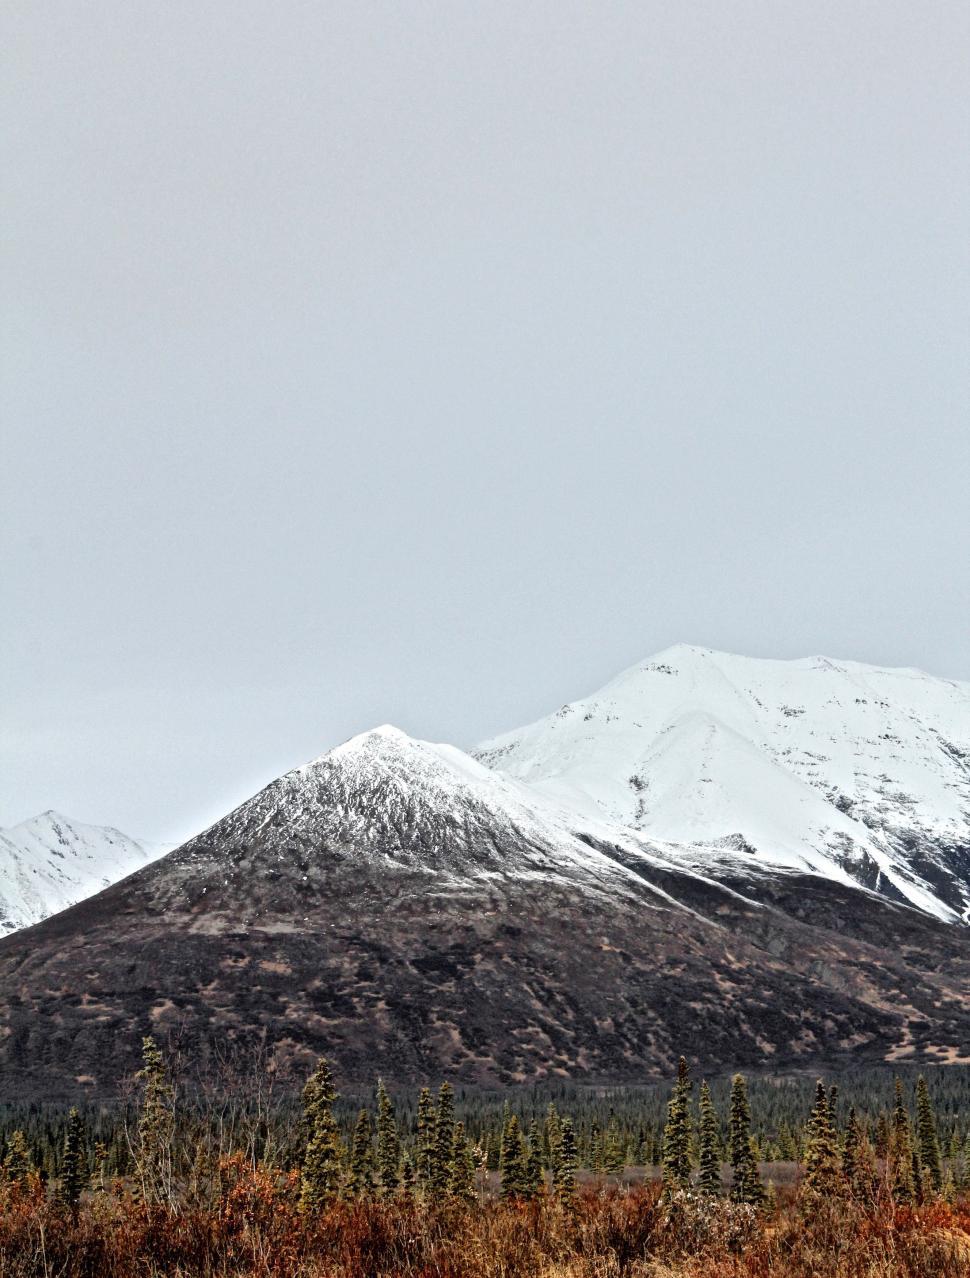 Free Image of Snowy Mountain Range With Trees in Foreground 